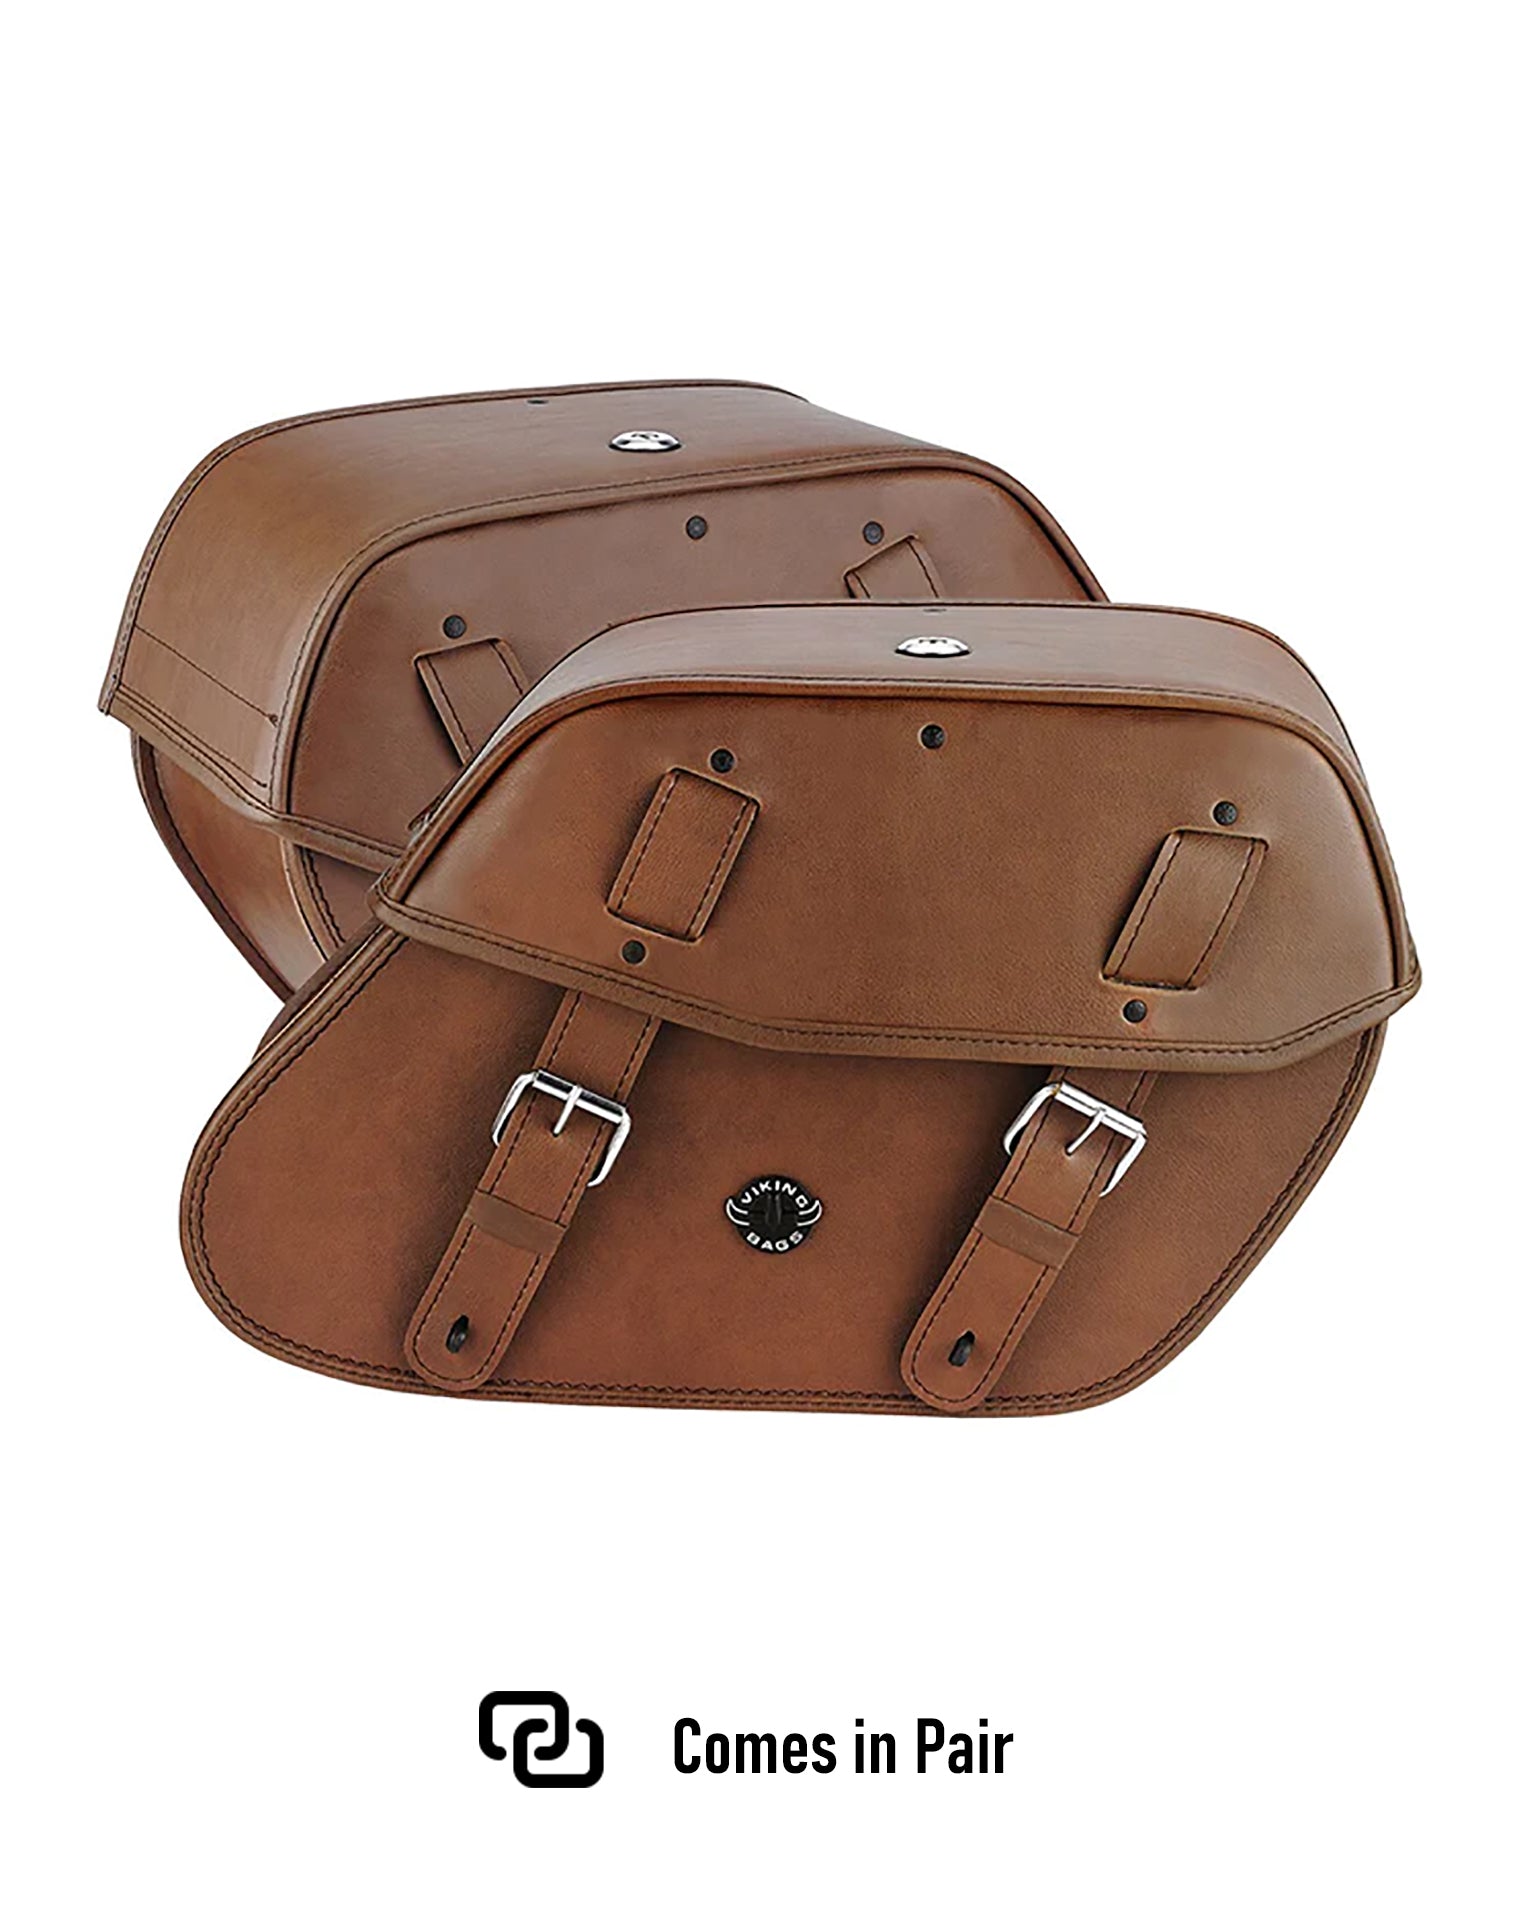 Viking Odin Brown Large Suzuki Boulevard C50 Vl800 Leather Motorcycle Saddlebags Weather Resistant Bags Comes in Pair